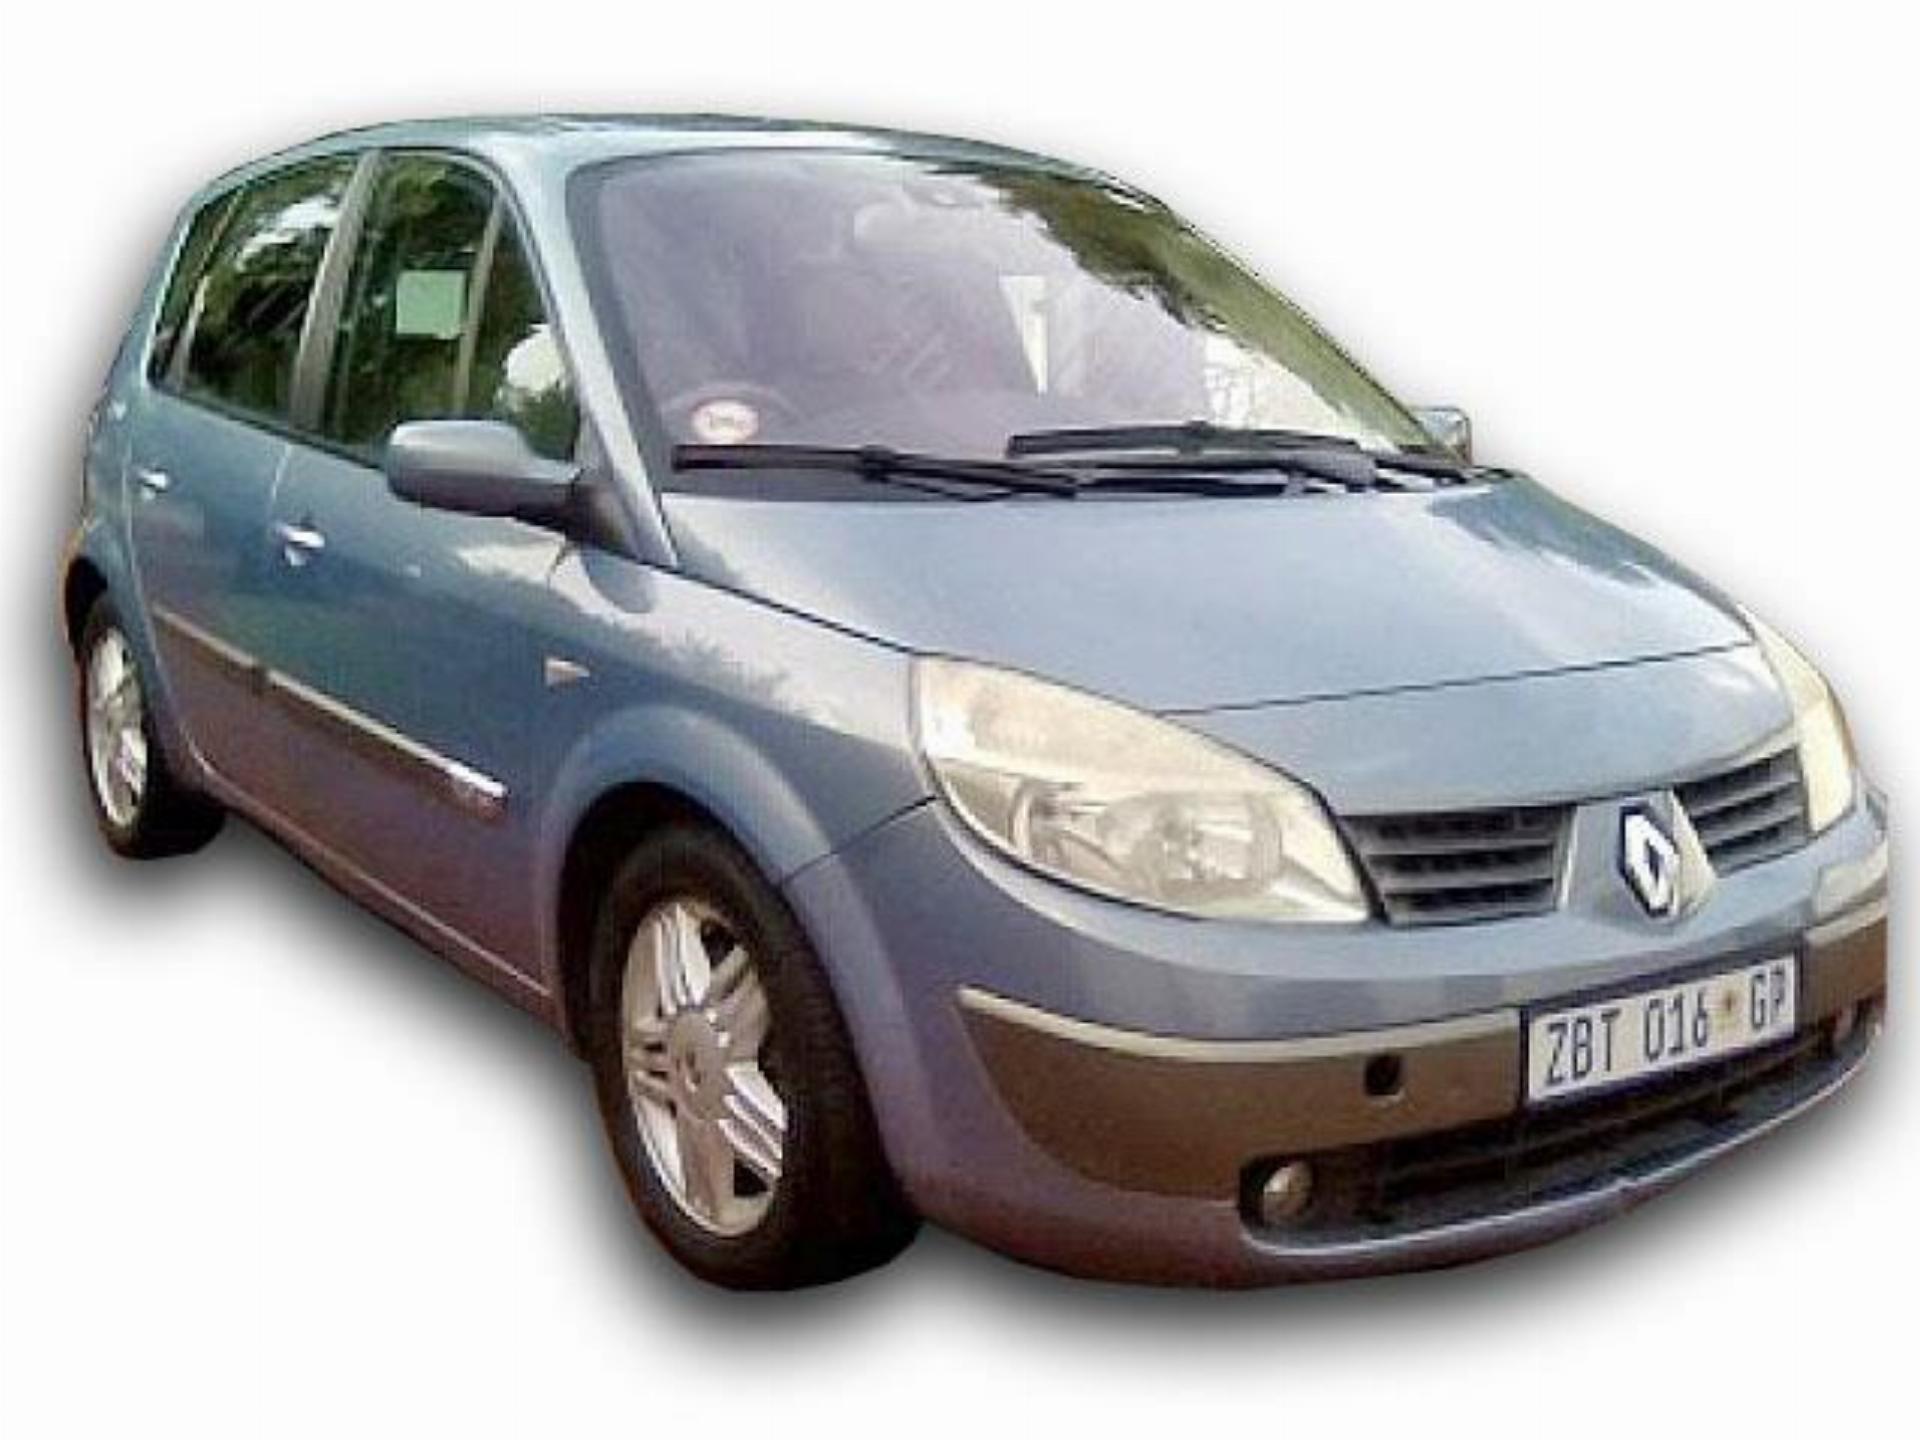 Used Renault Megane Scenic 2.0 Automatic 2005 on auction